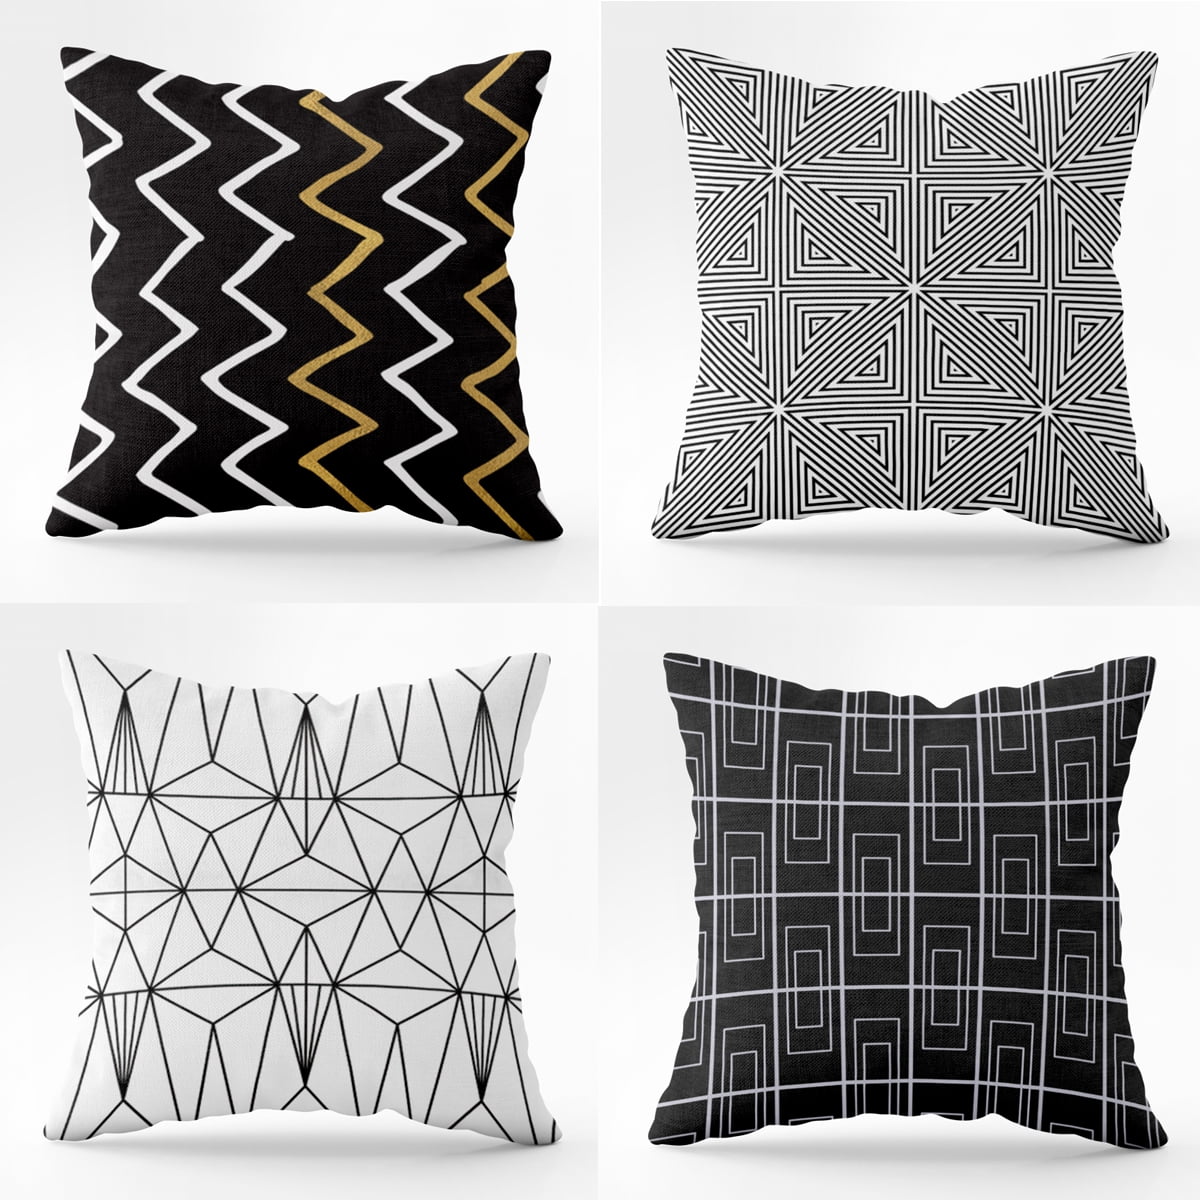 Home Decor Geometry Printing Cotton Linen Pillow Case Office Waist Cushion Cover 